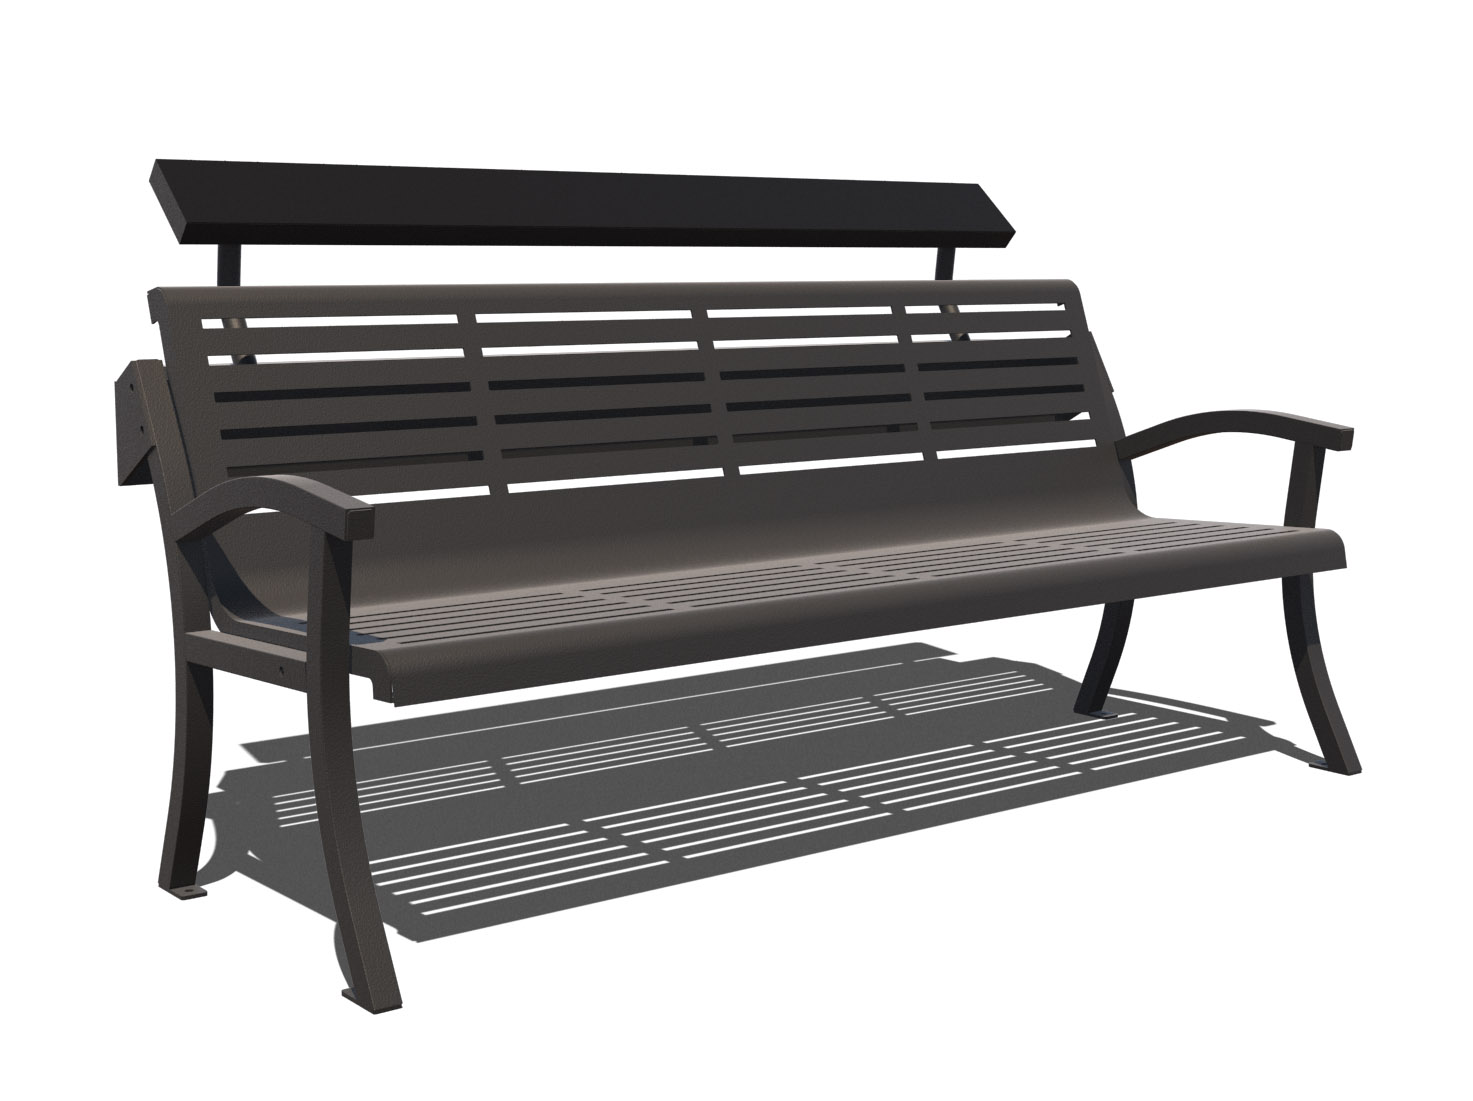 SOLARCHARGEBENCH product rendering